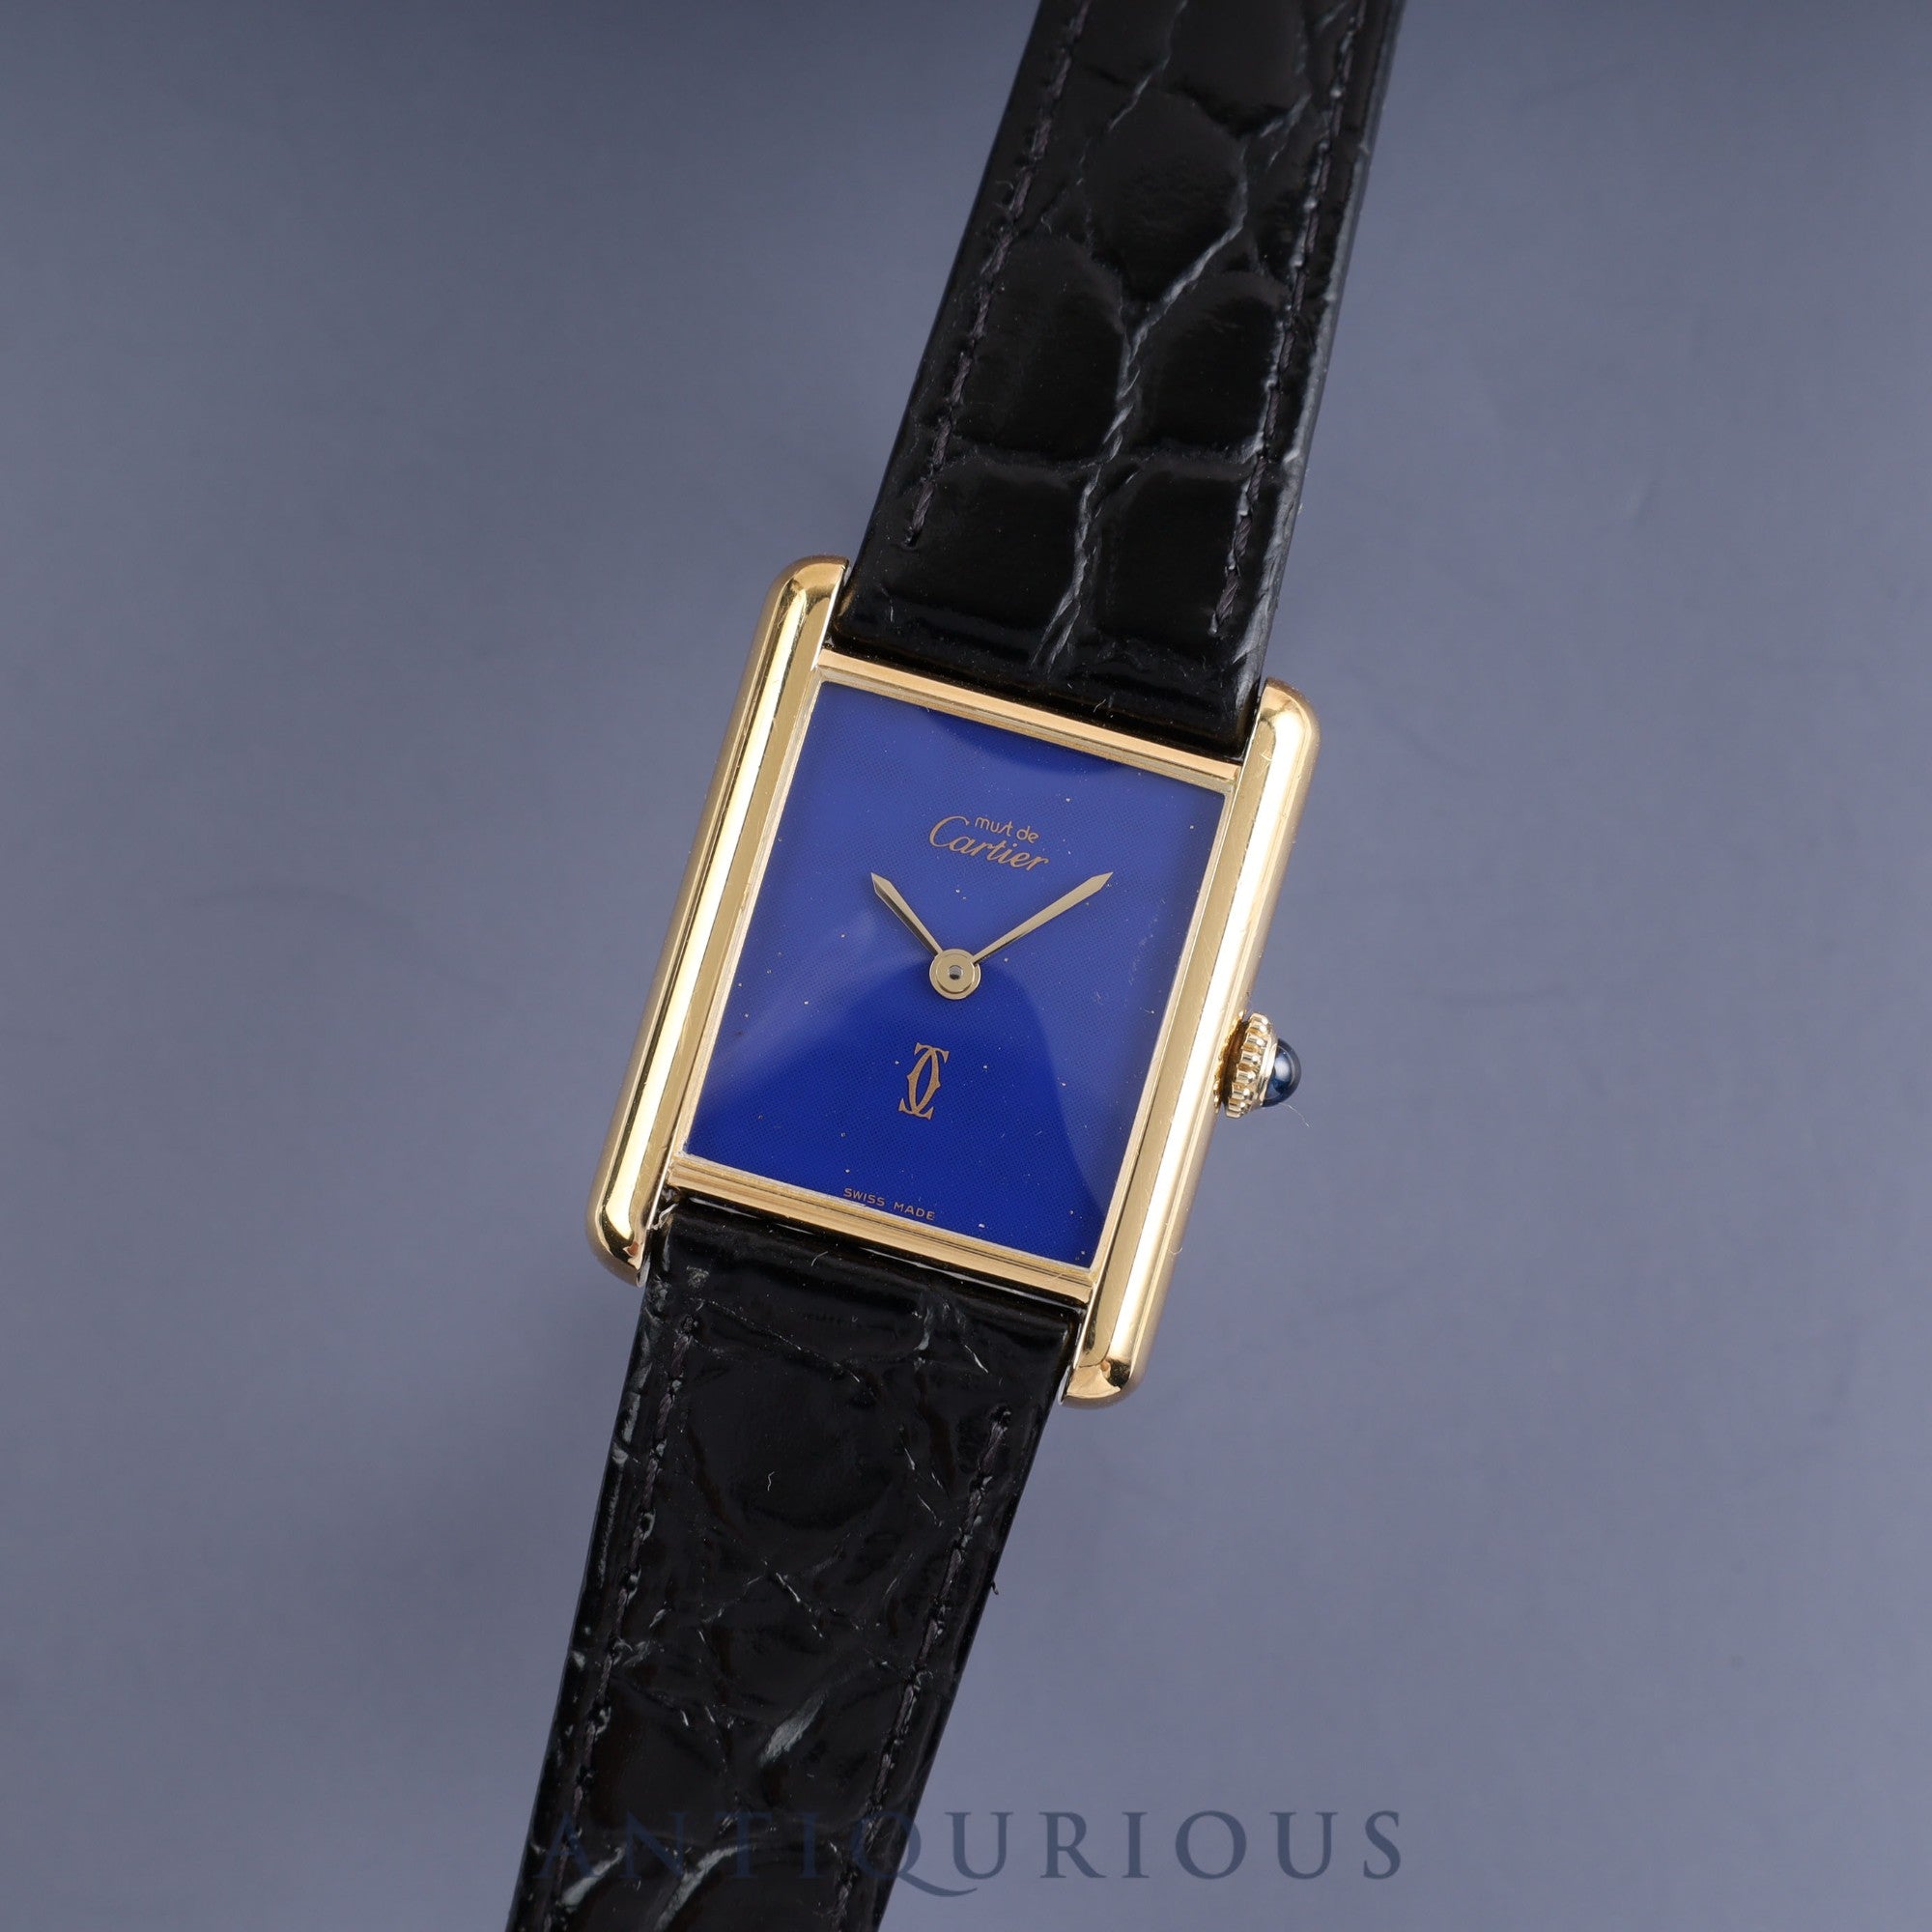 CARTIER Must Tank LM Manual winding SV925 Leather Genuine buckle Lapis lazuli dial Cartier boutique complete service